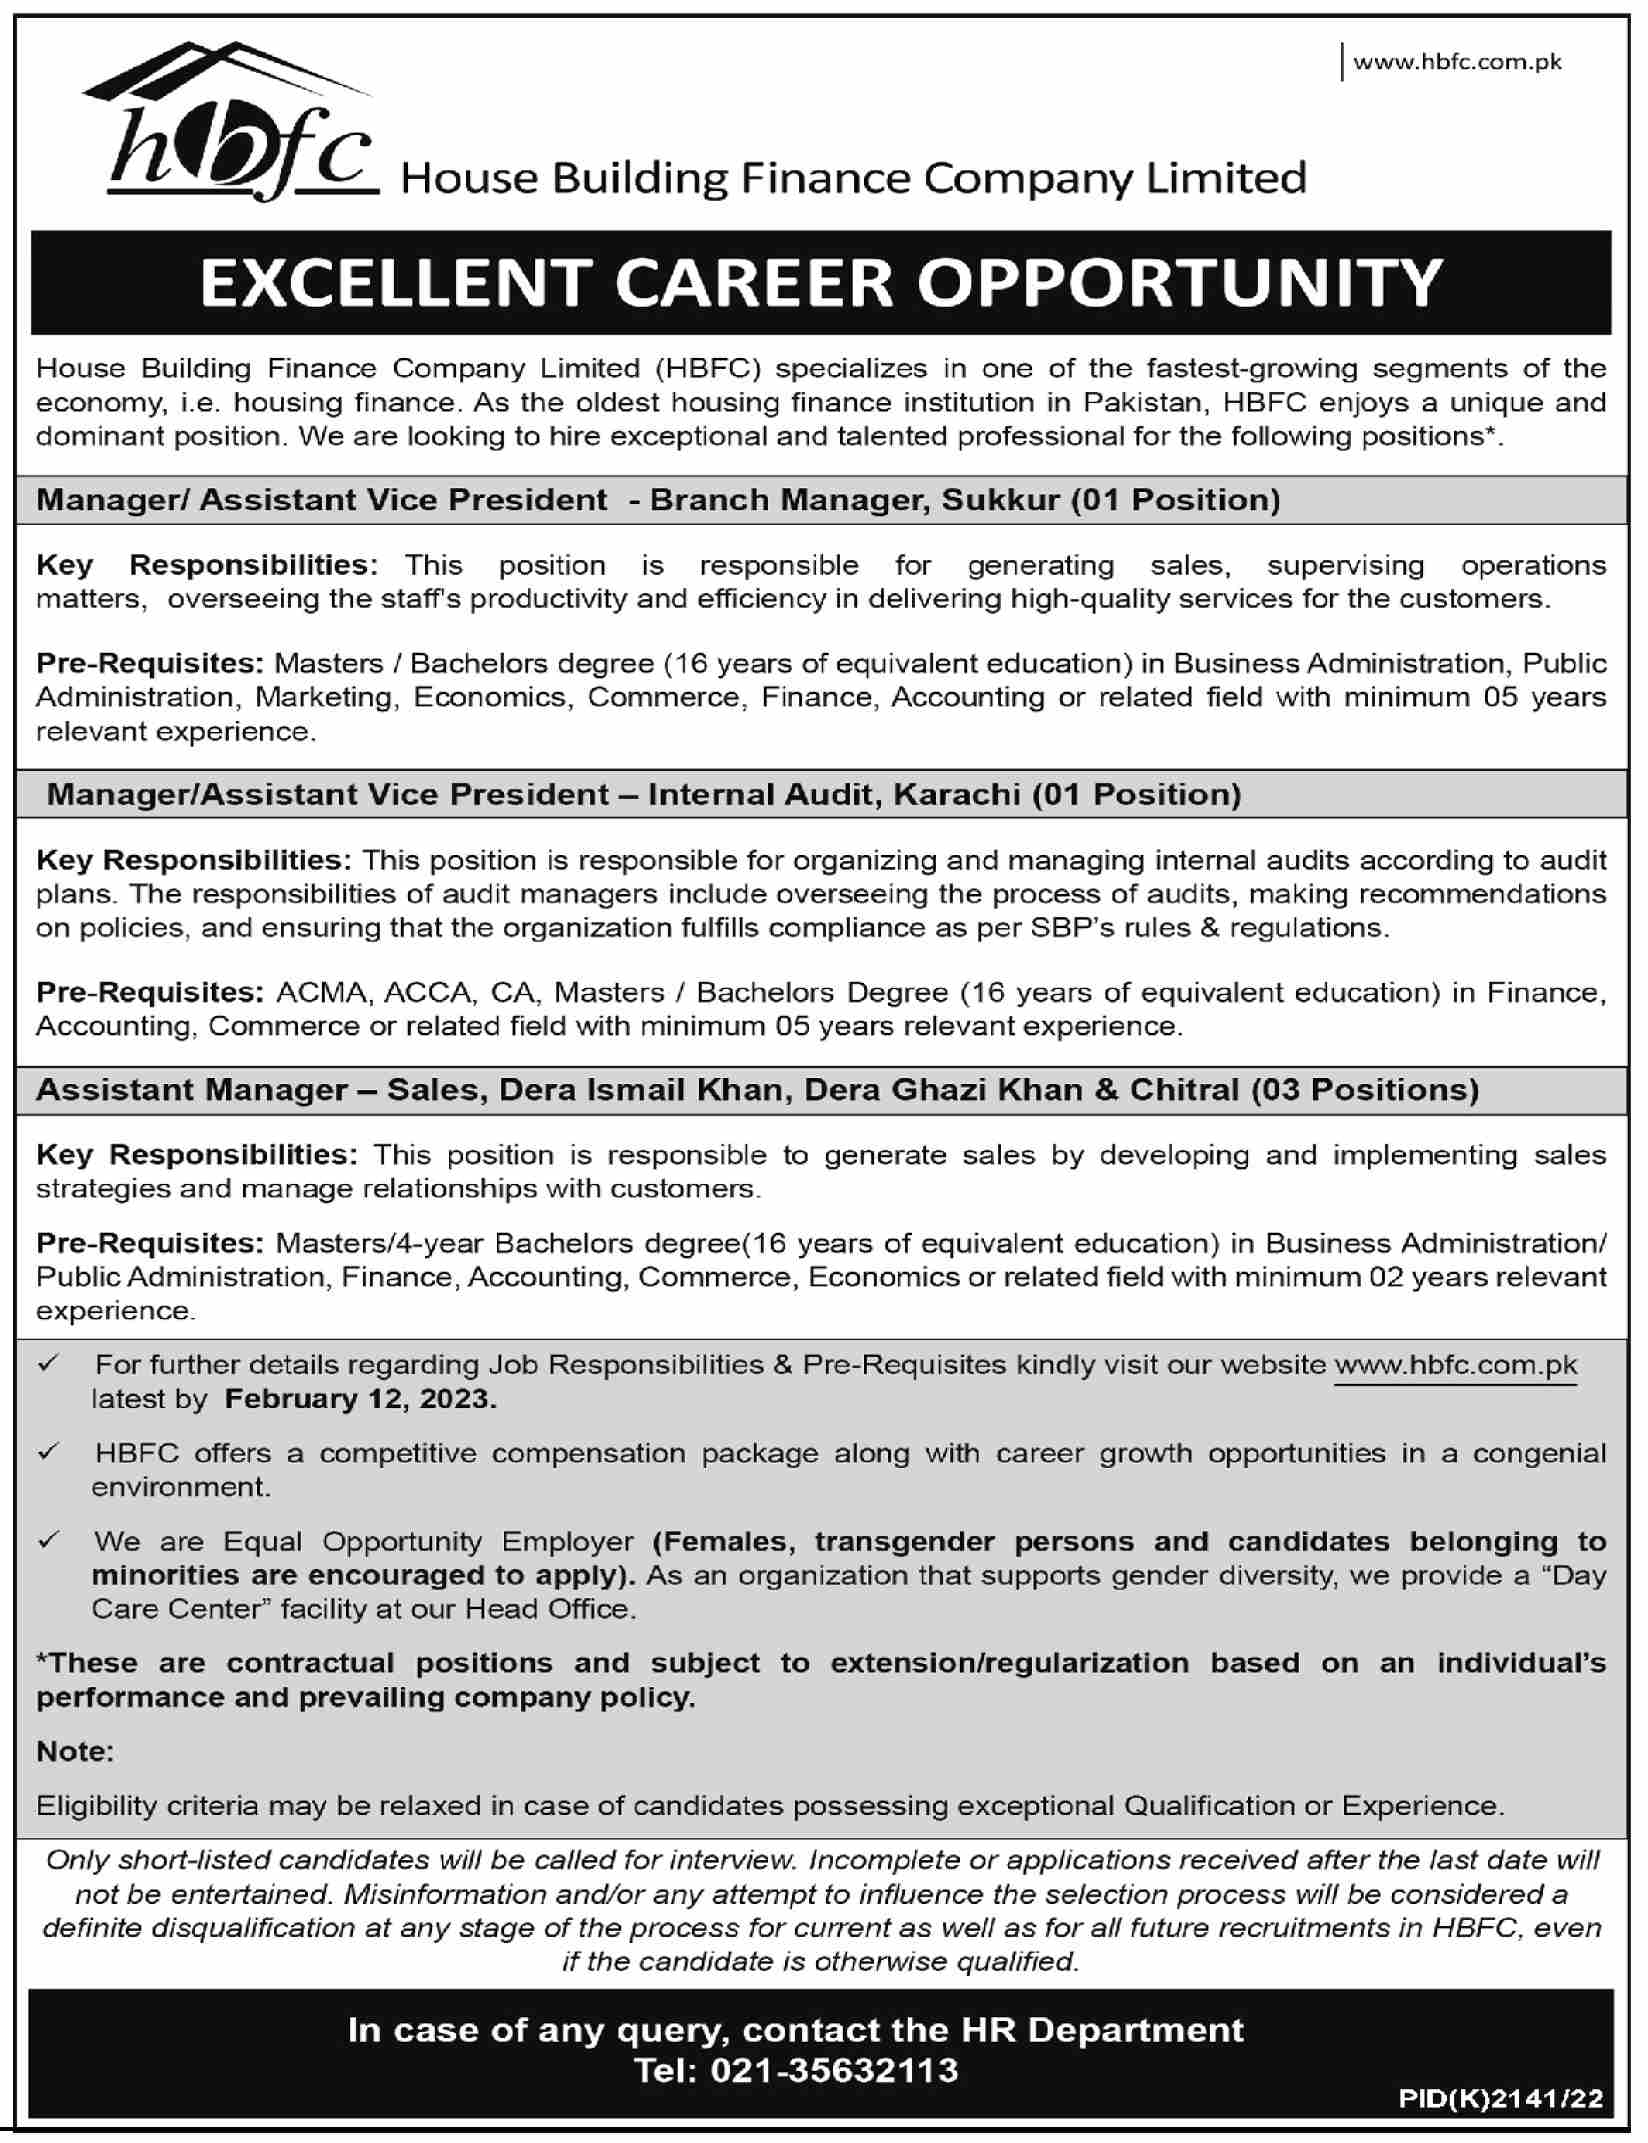 HBFC Jobs 2023 - House Building Finance Company Limited